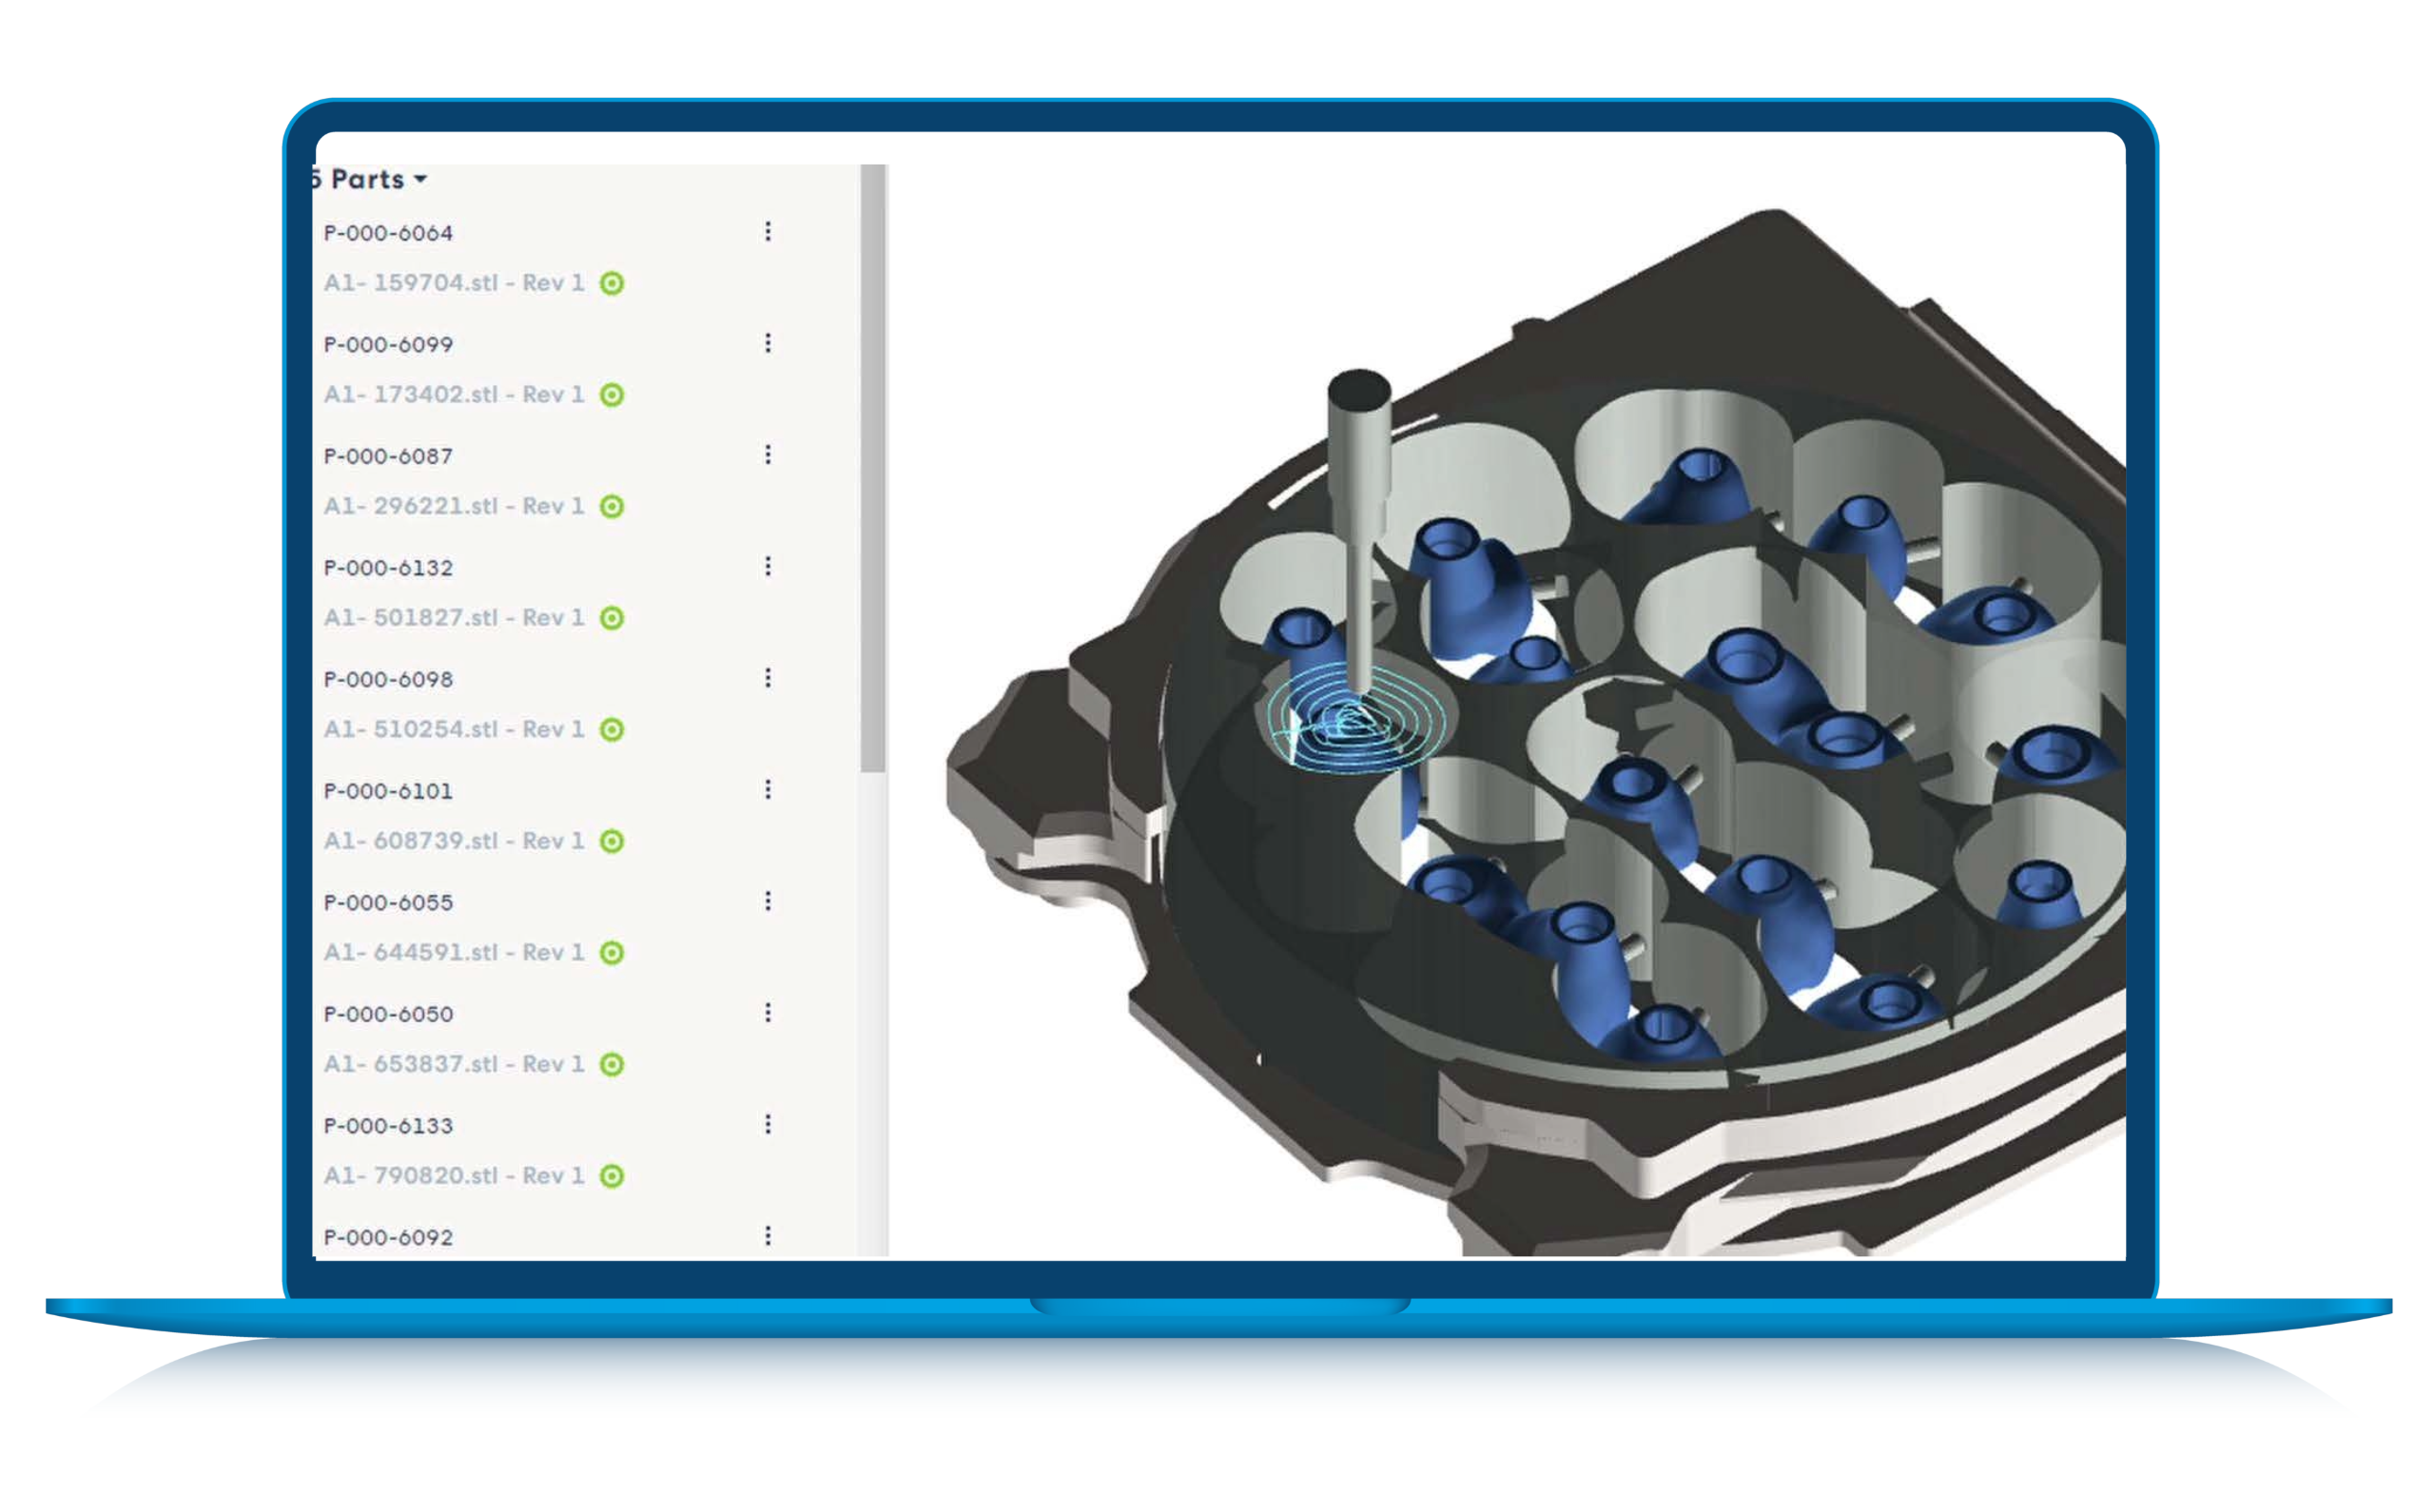 Oqton-Manufacturing OS-Image shows screenshot of dental milling smart toolpath generation